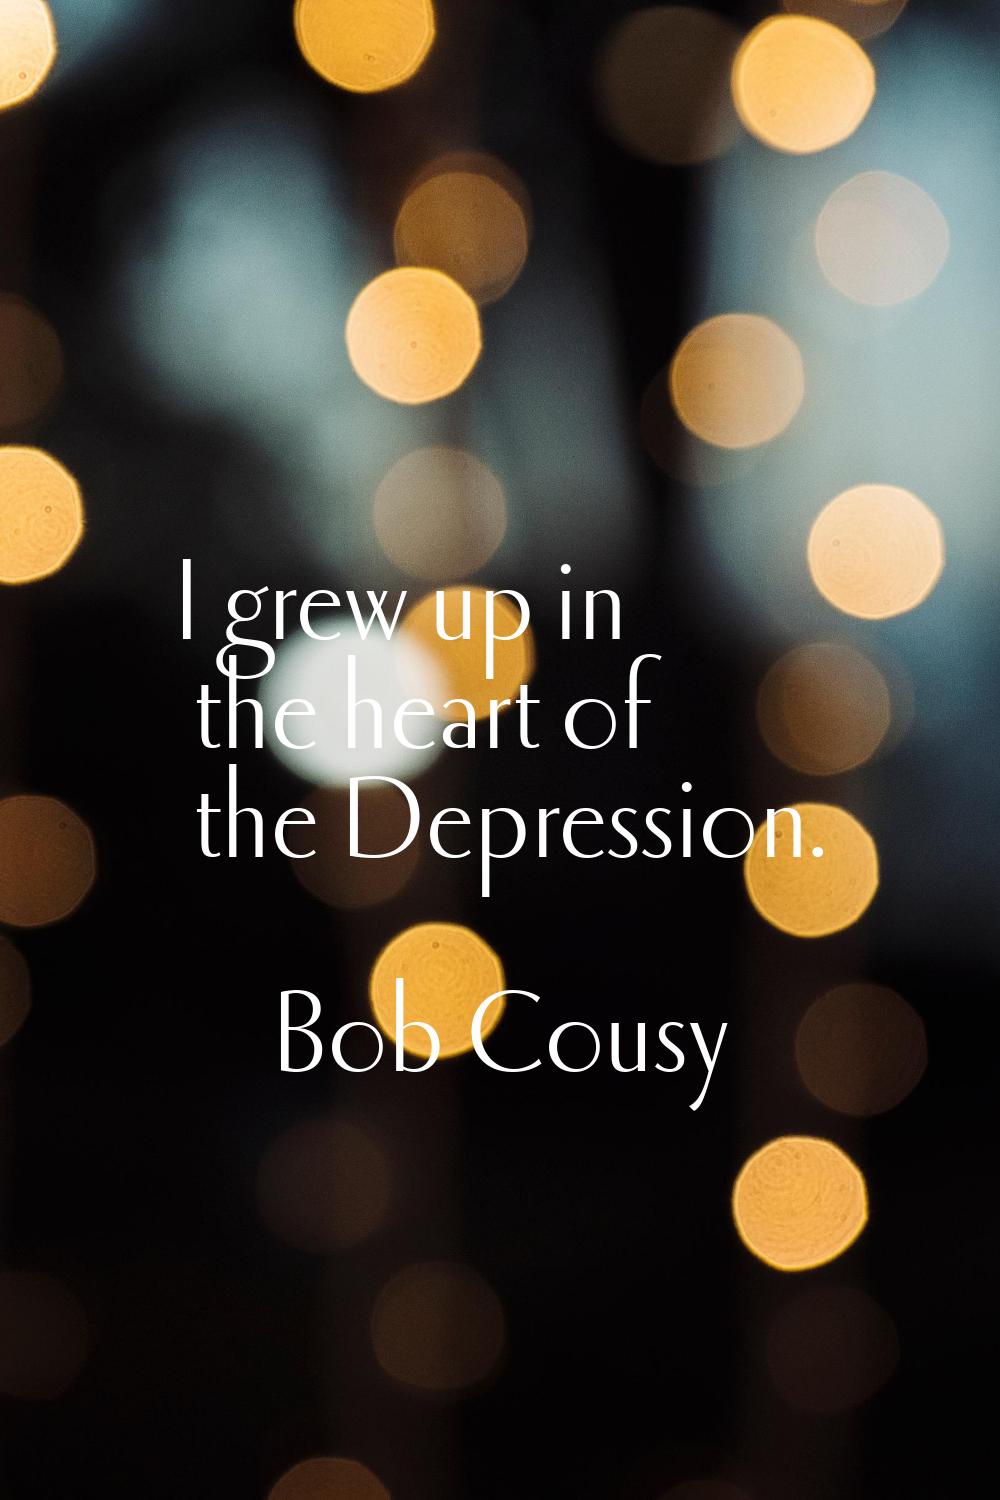 I grew up in the heart of the Depression.